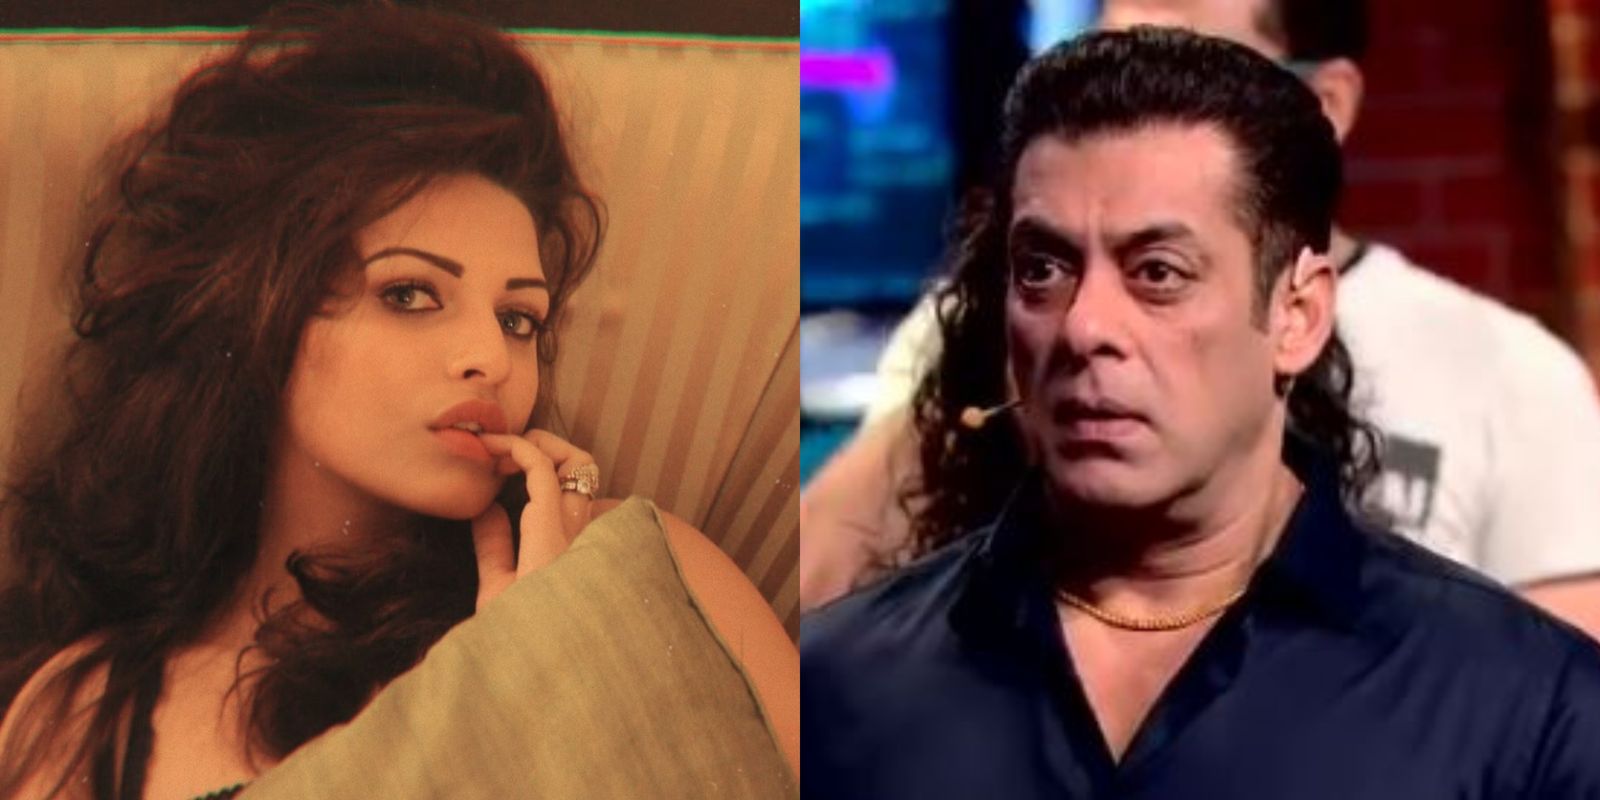 Bigg Boss 13: Himanshi Khurana Defends Video Mocking Salman Khan For Washing Dishes, Says Was Forced To Say He's Biased